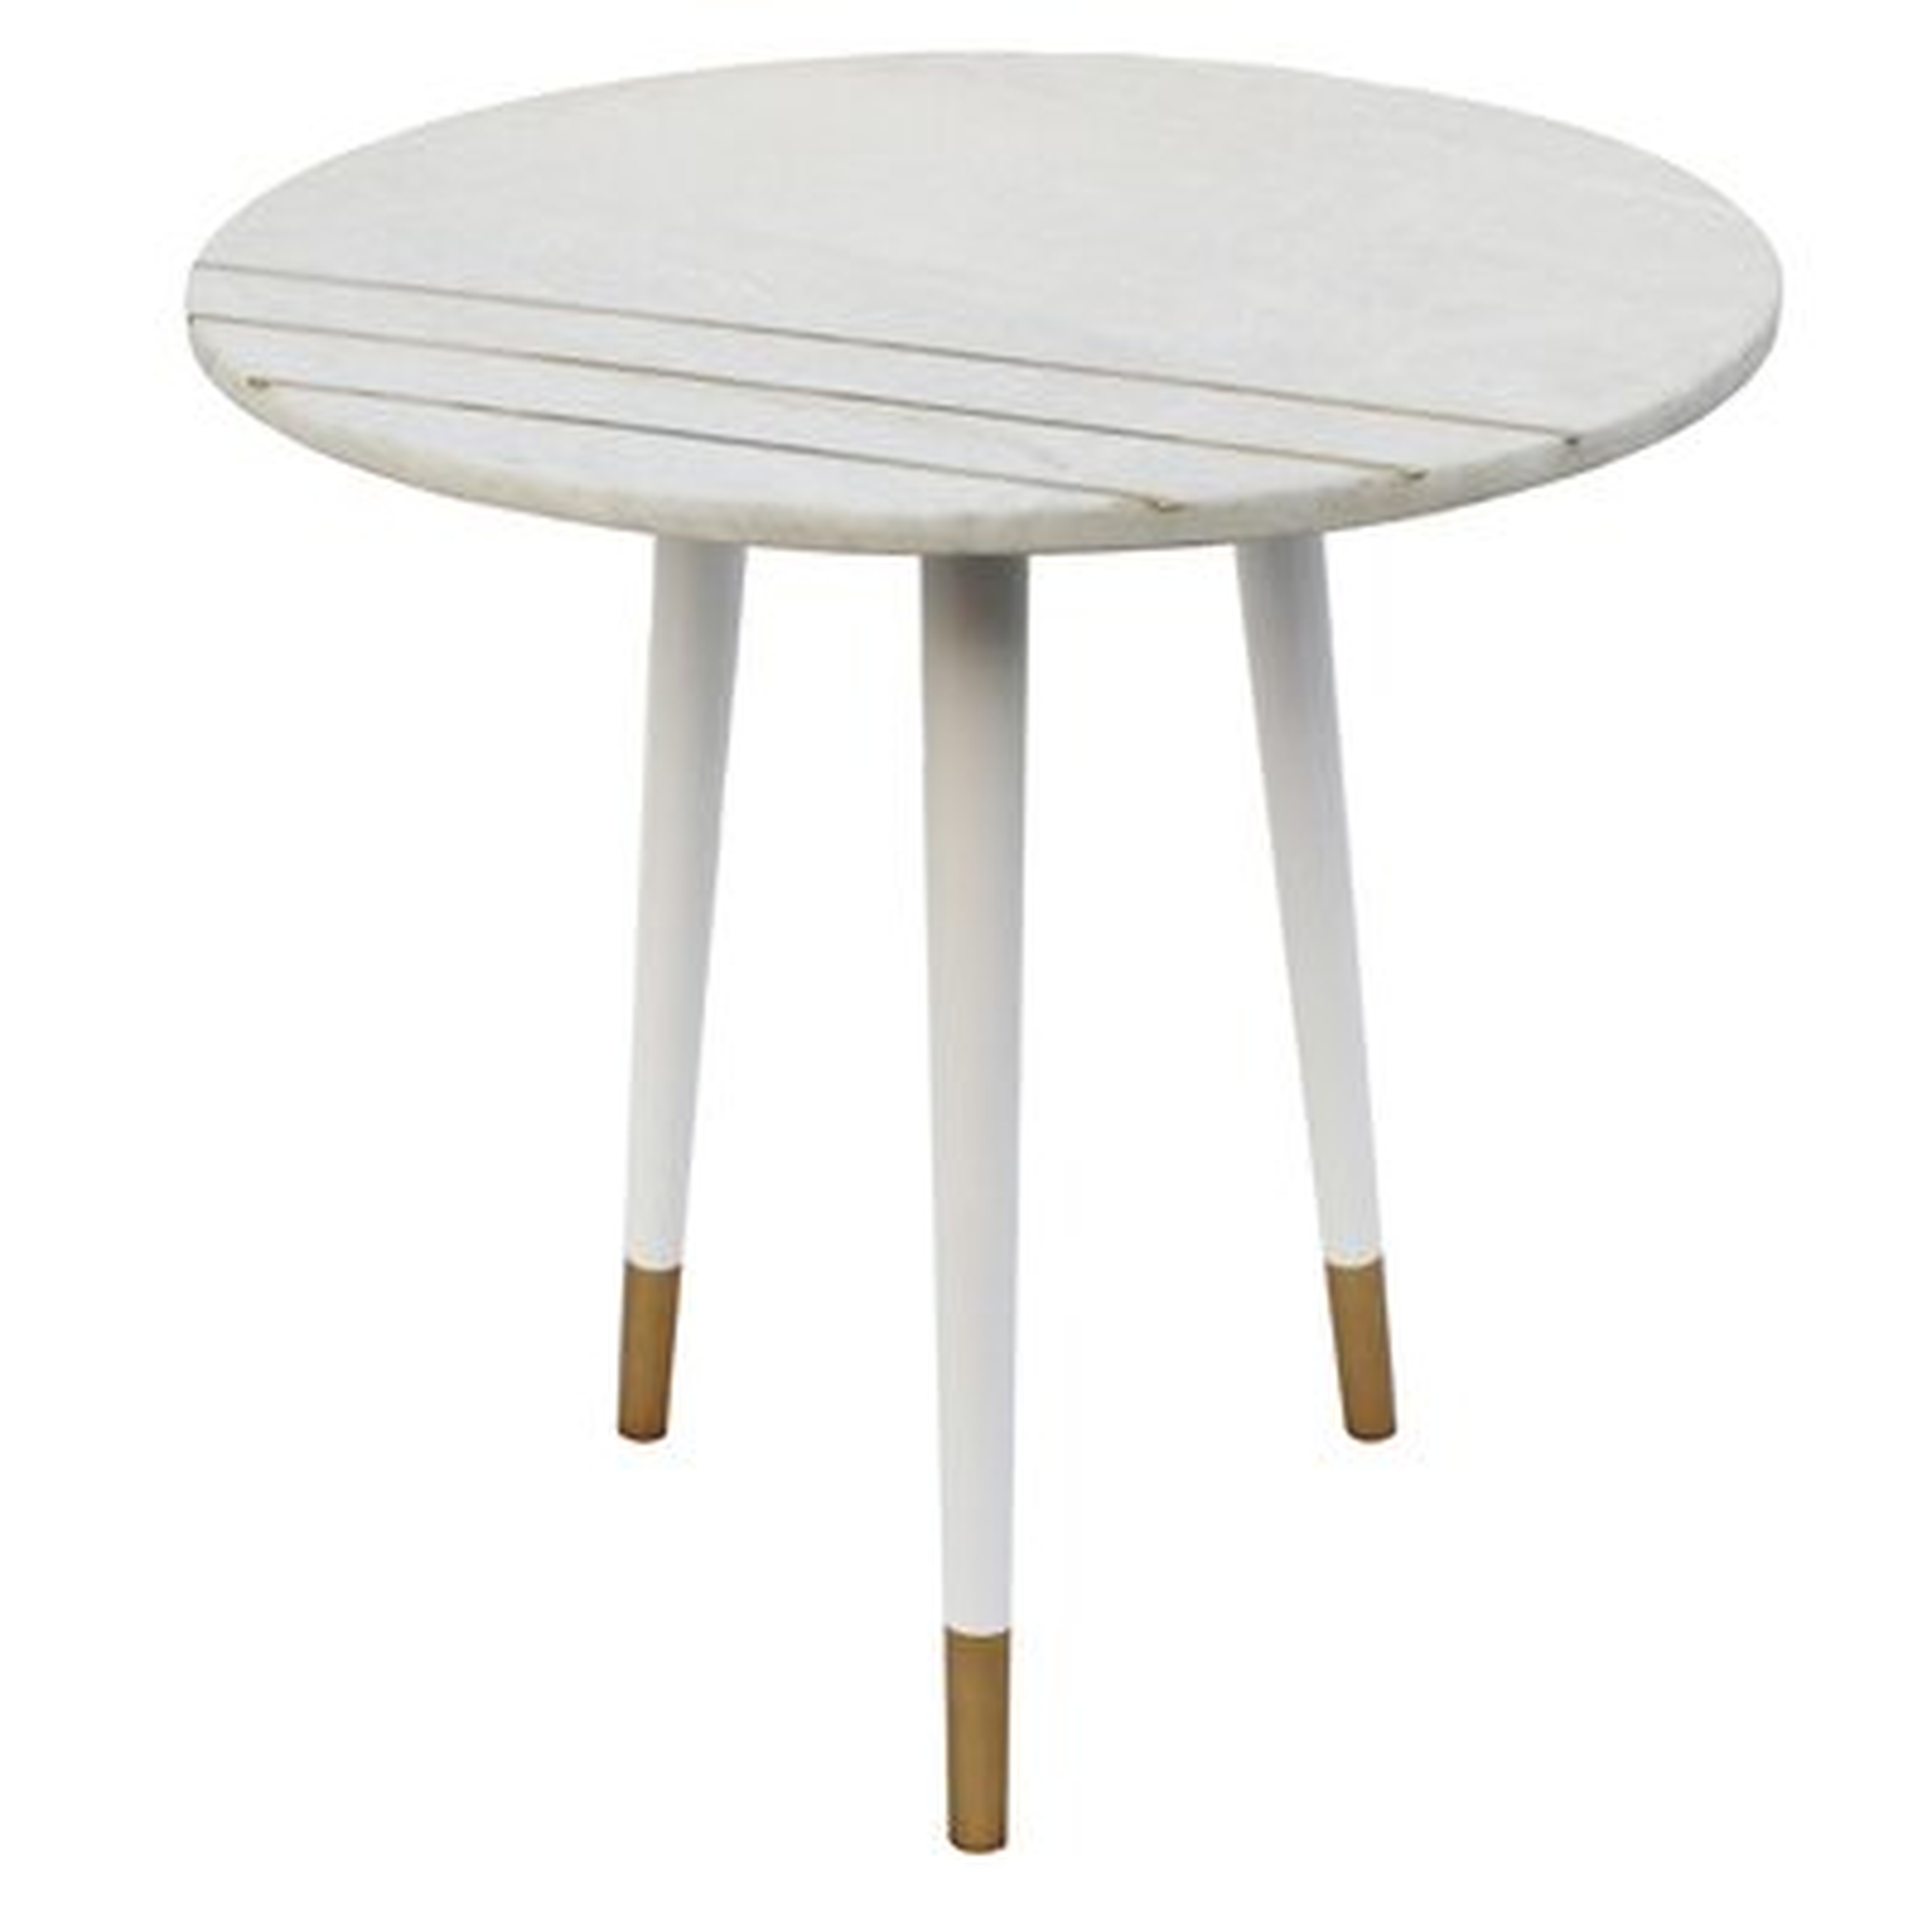 Gail Round Side Table with Aluminum Legs and Brass Inlaid Marble Top - White - Wayfair